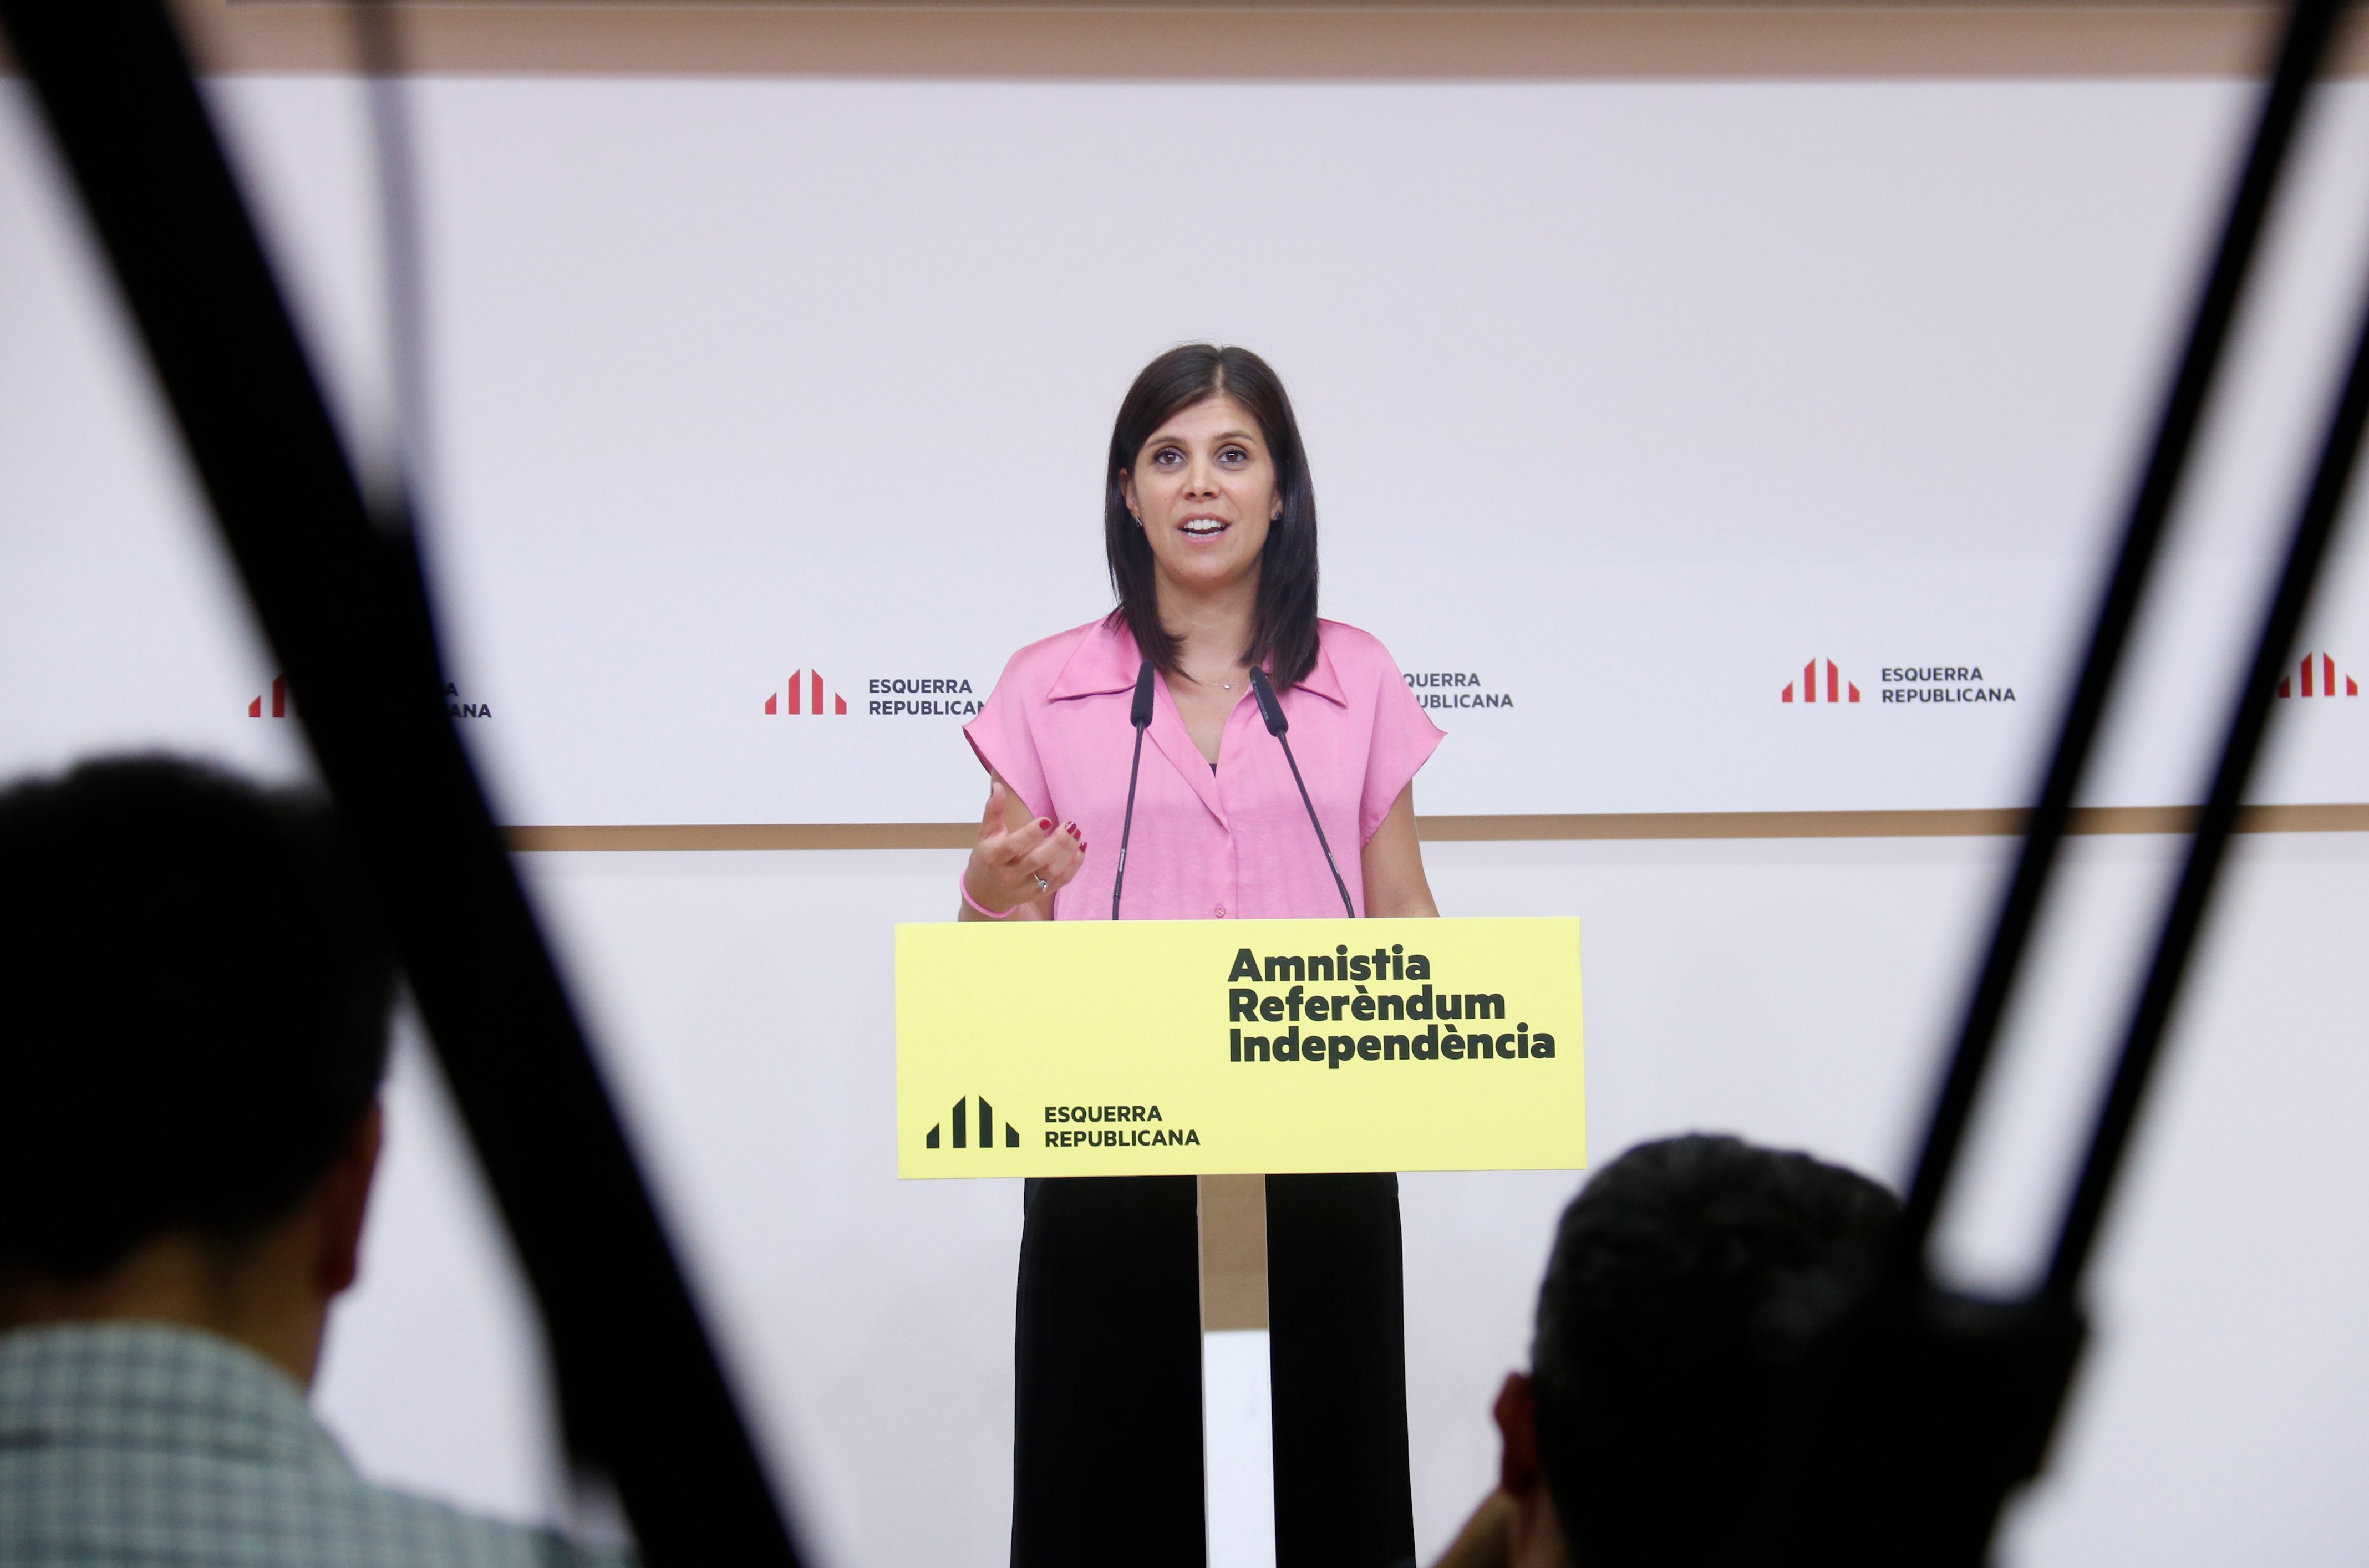 ERC to Junts: to avoid "perverting the Catalan Parliament", replace Borràs